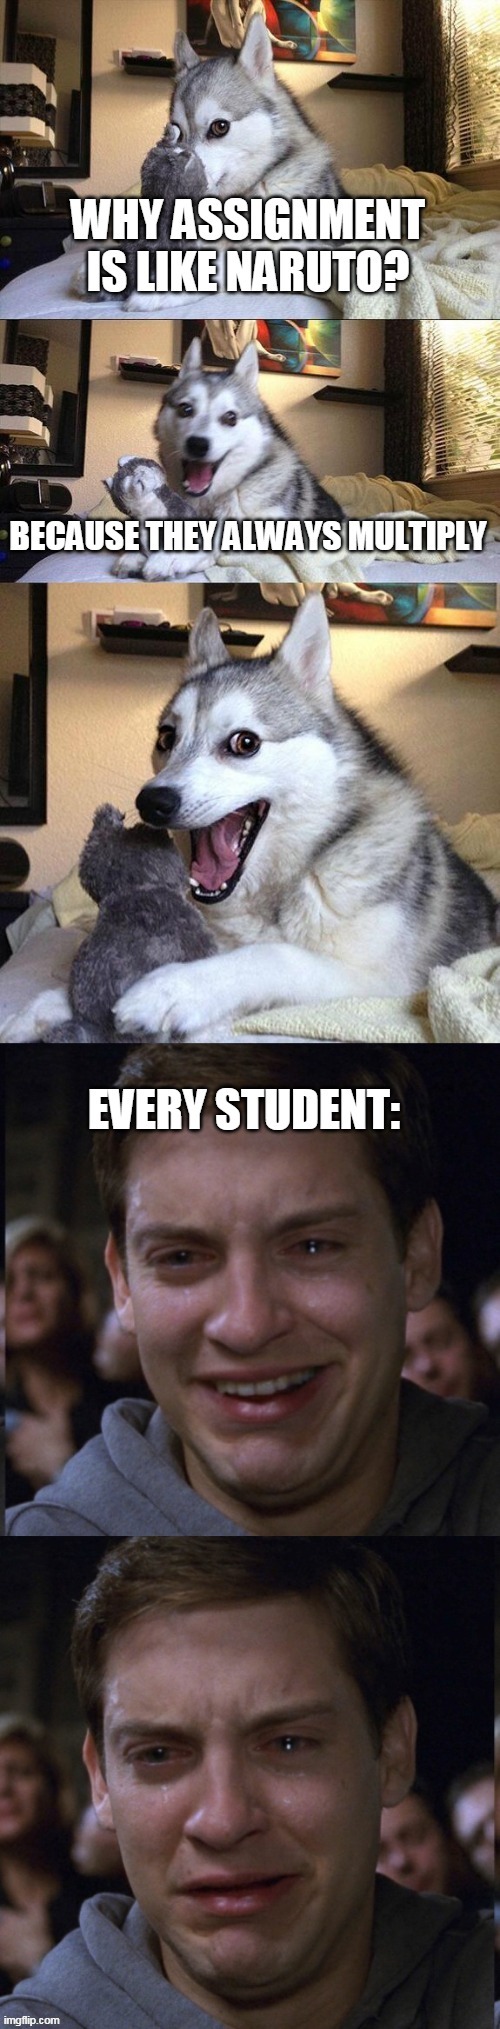 Why schools is like Sakura?... Because they are both useless!!! | image tagged in memes,meme,bad pun dog | made w/ Imgflip meme maker